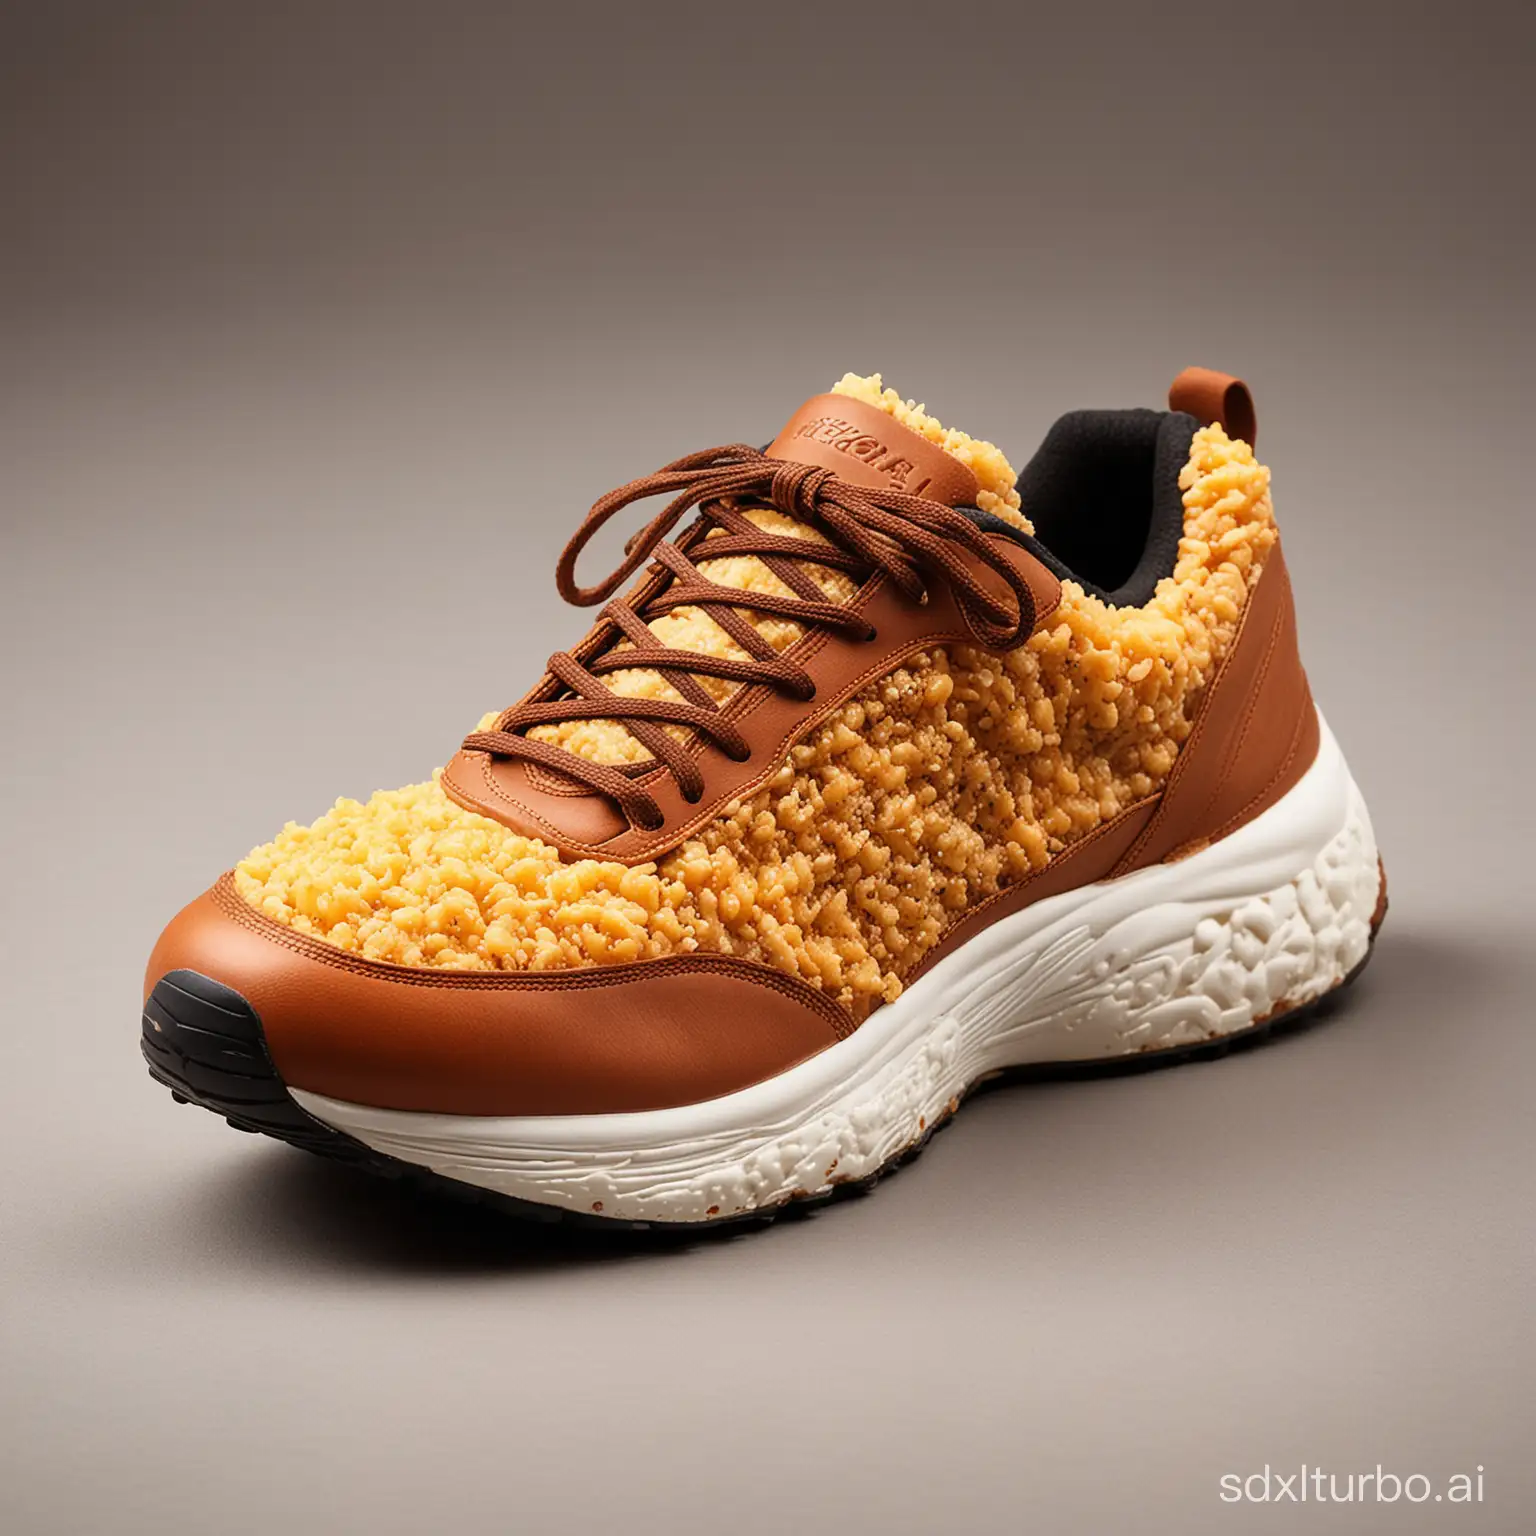 sports shoe made of   mushed potato and minced meat